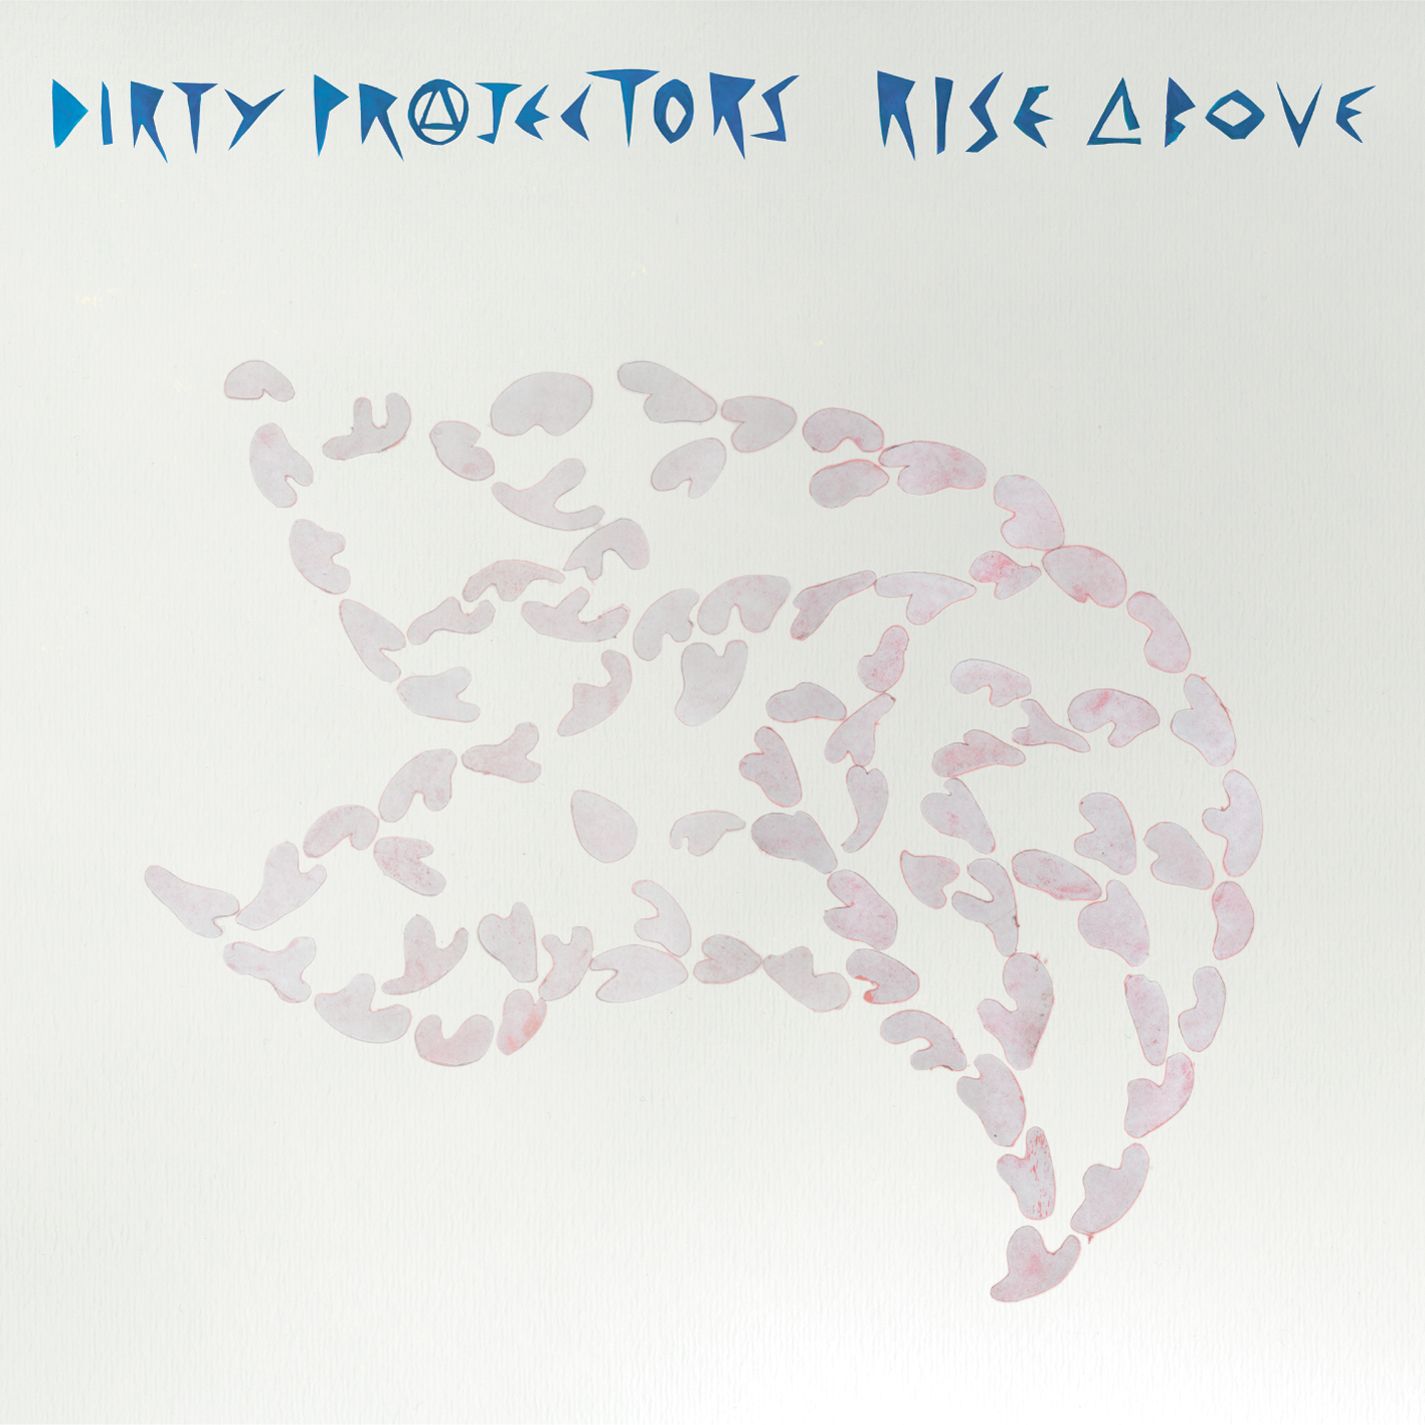 Dirty Projectors' Rise Above is out now.